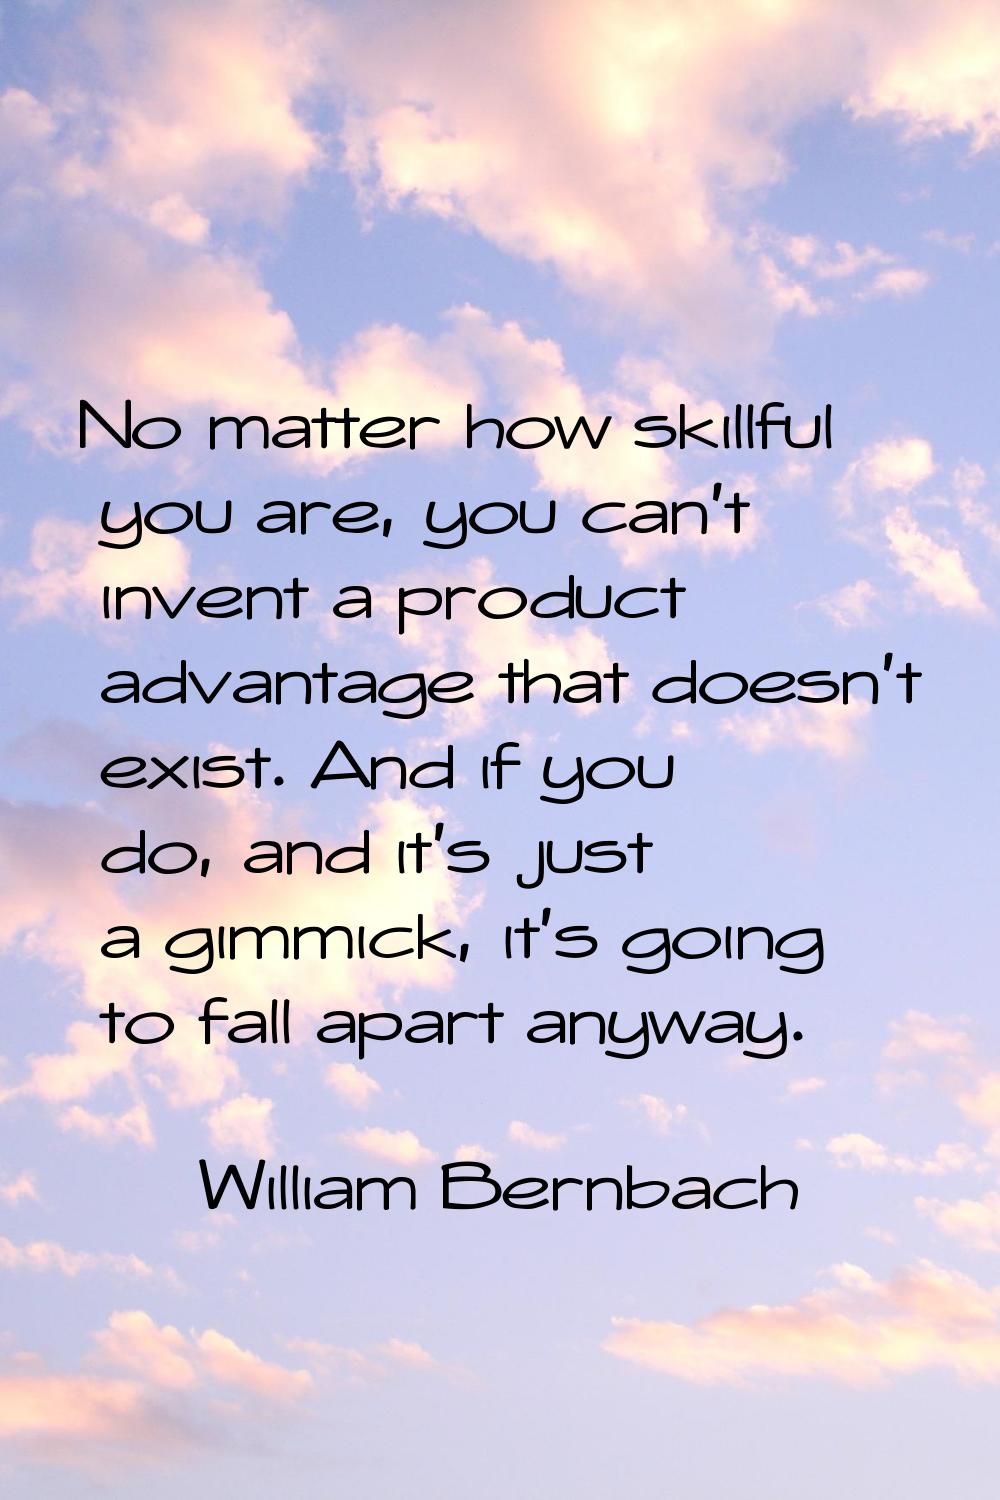 No matter how skillful you are, you can't invent a product advantage that doesn't exist. And if you